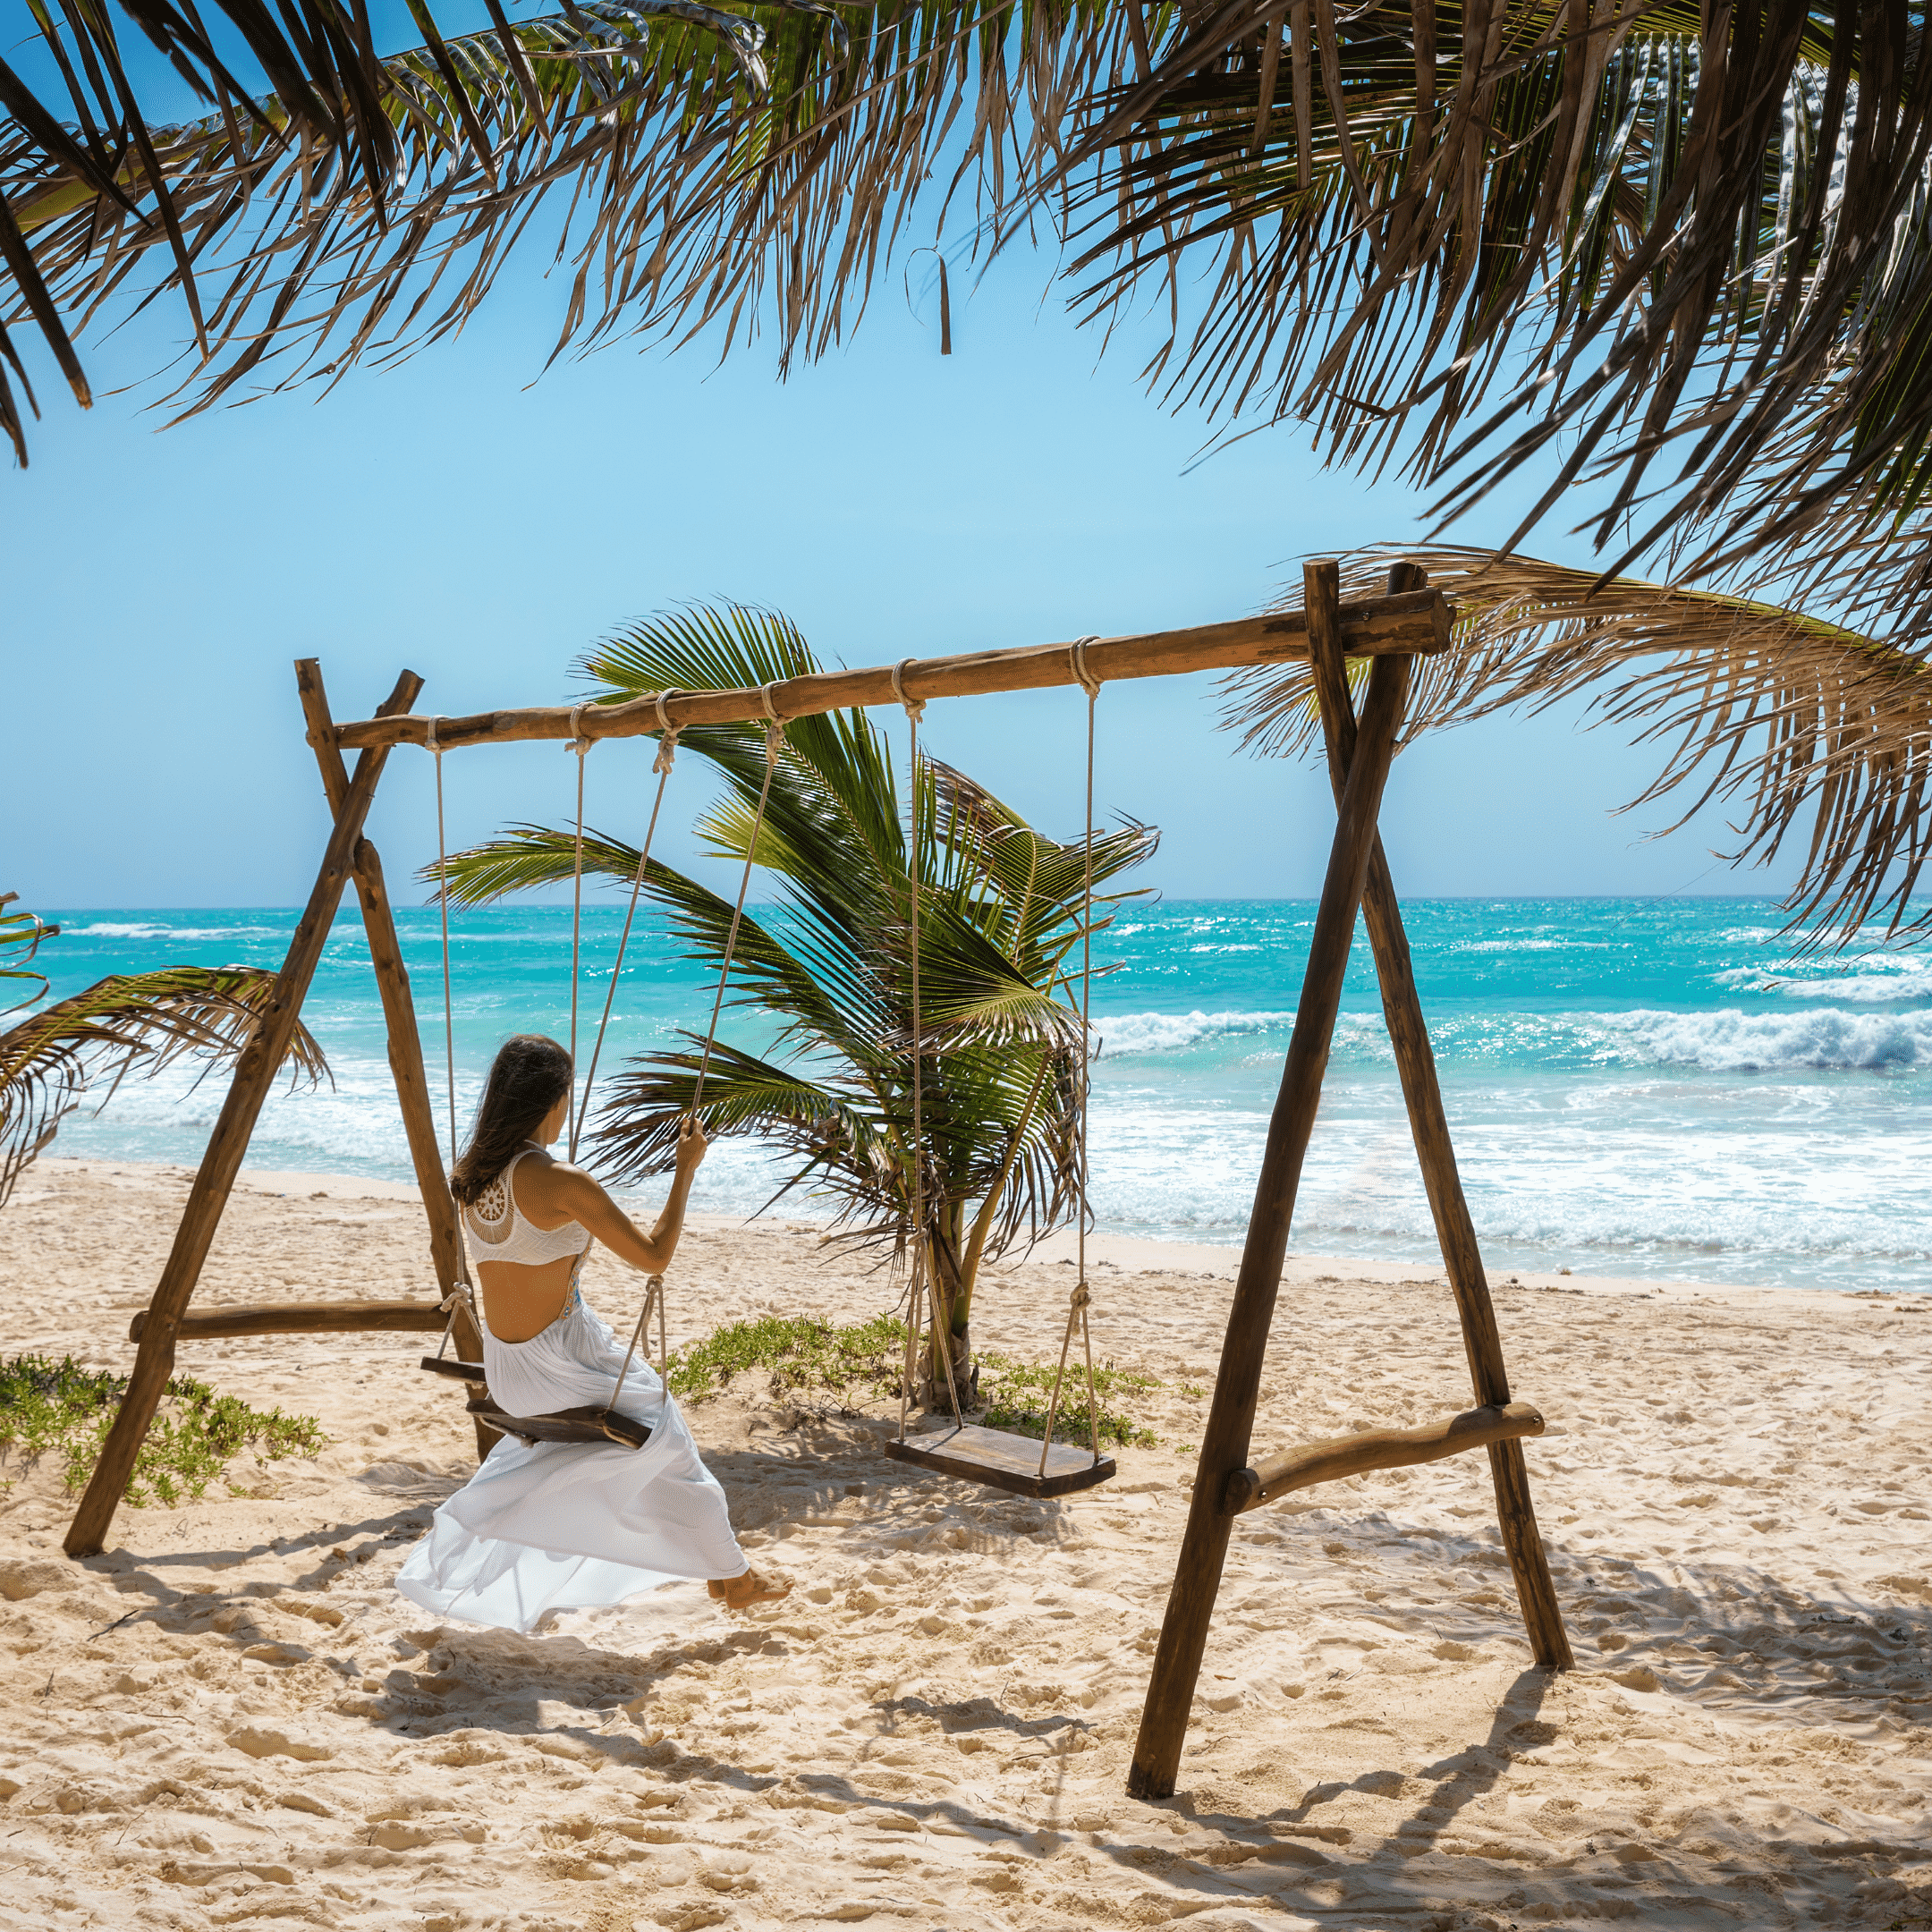 25 places to visit before turning 25 | tulum, mexico